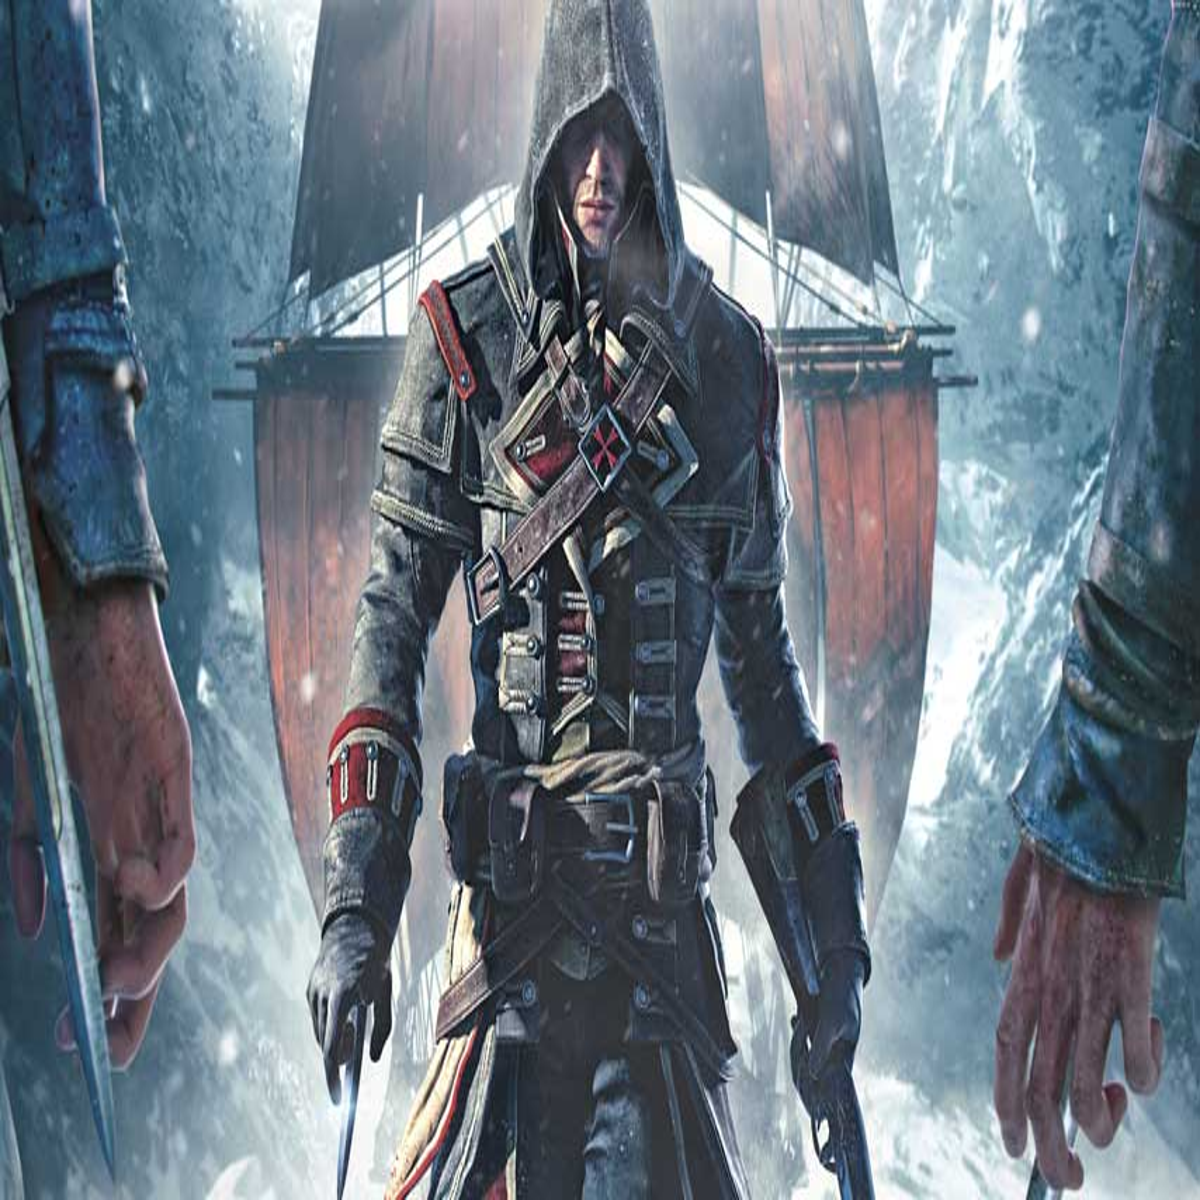 Assassin's Creed Rogue might come to PS4 and Xbox One, according to Italian  retailer listings